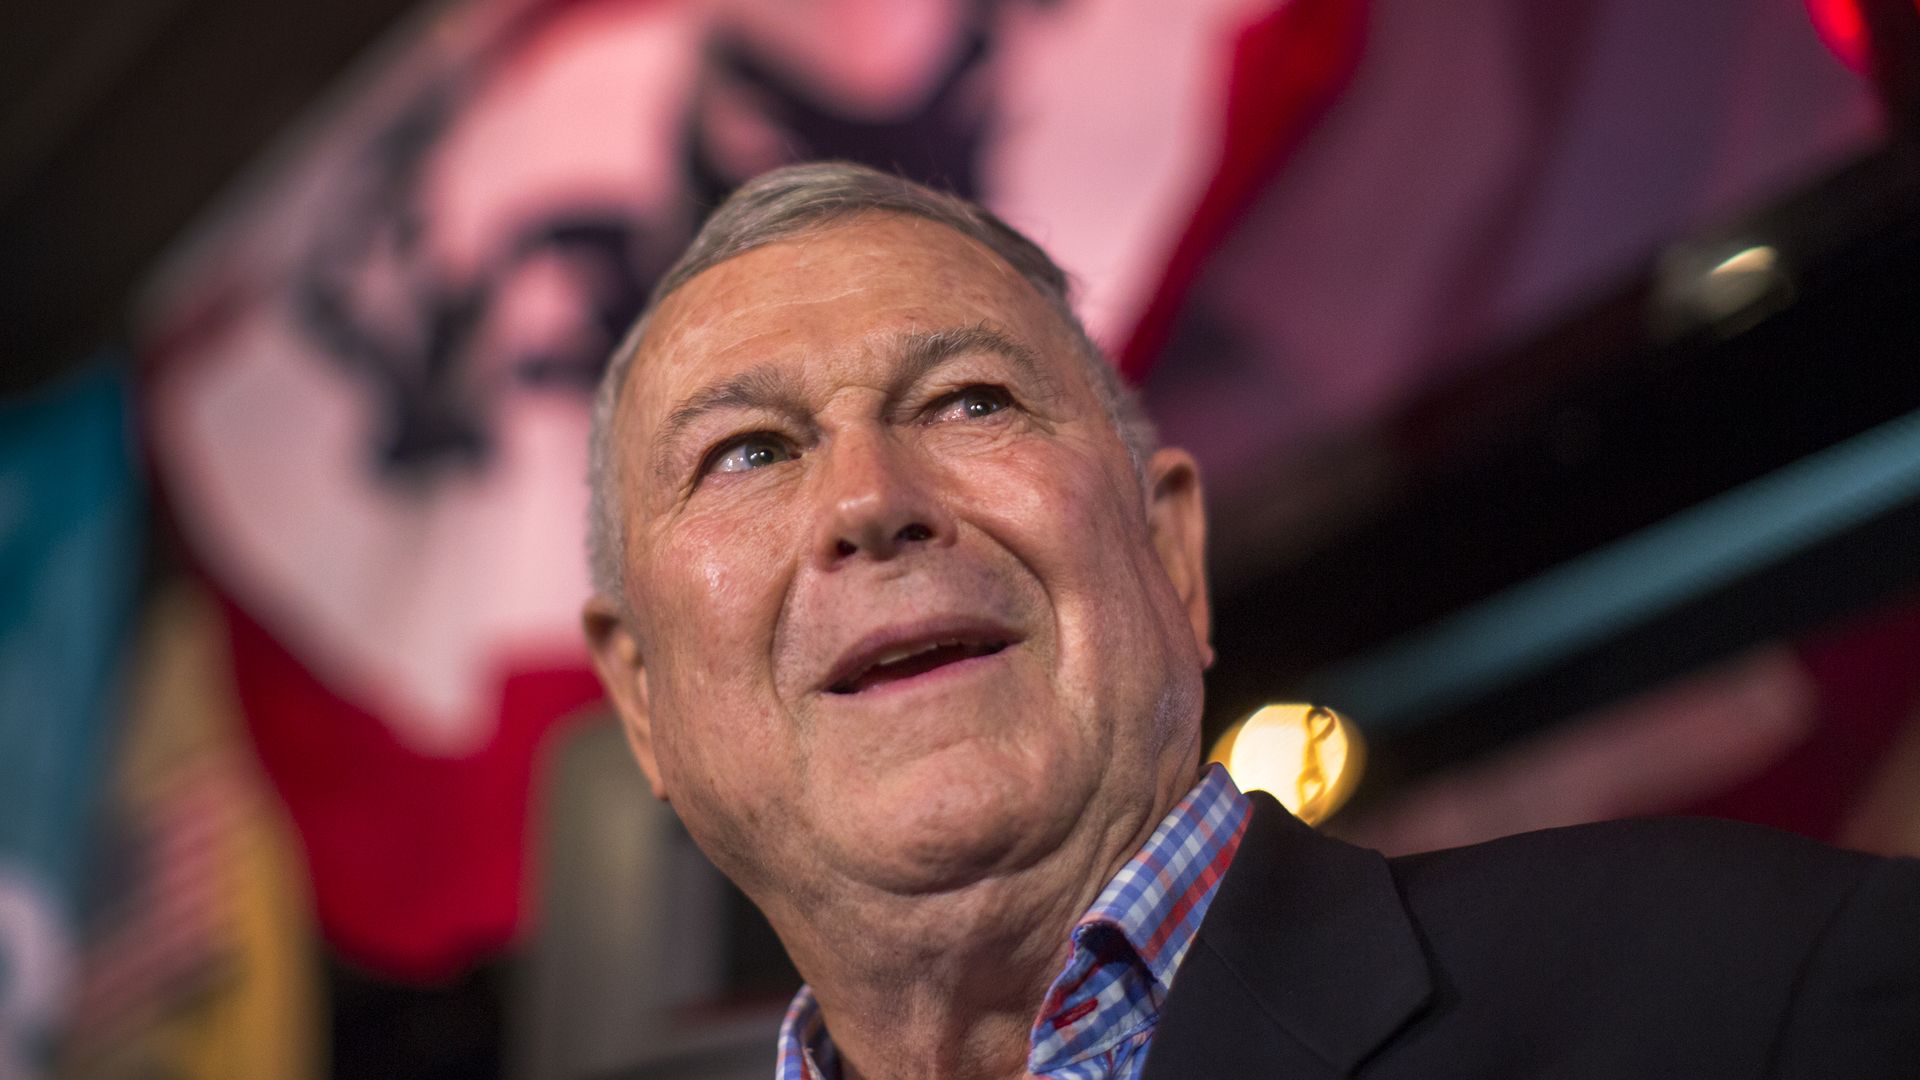 This is a picture of Dana Rohrabacher